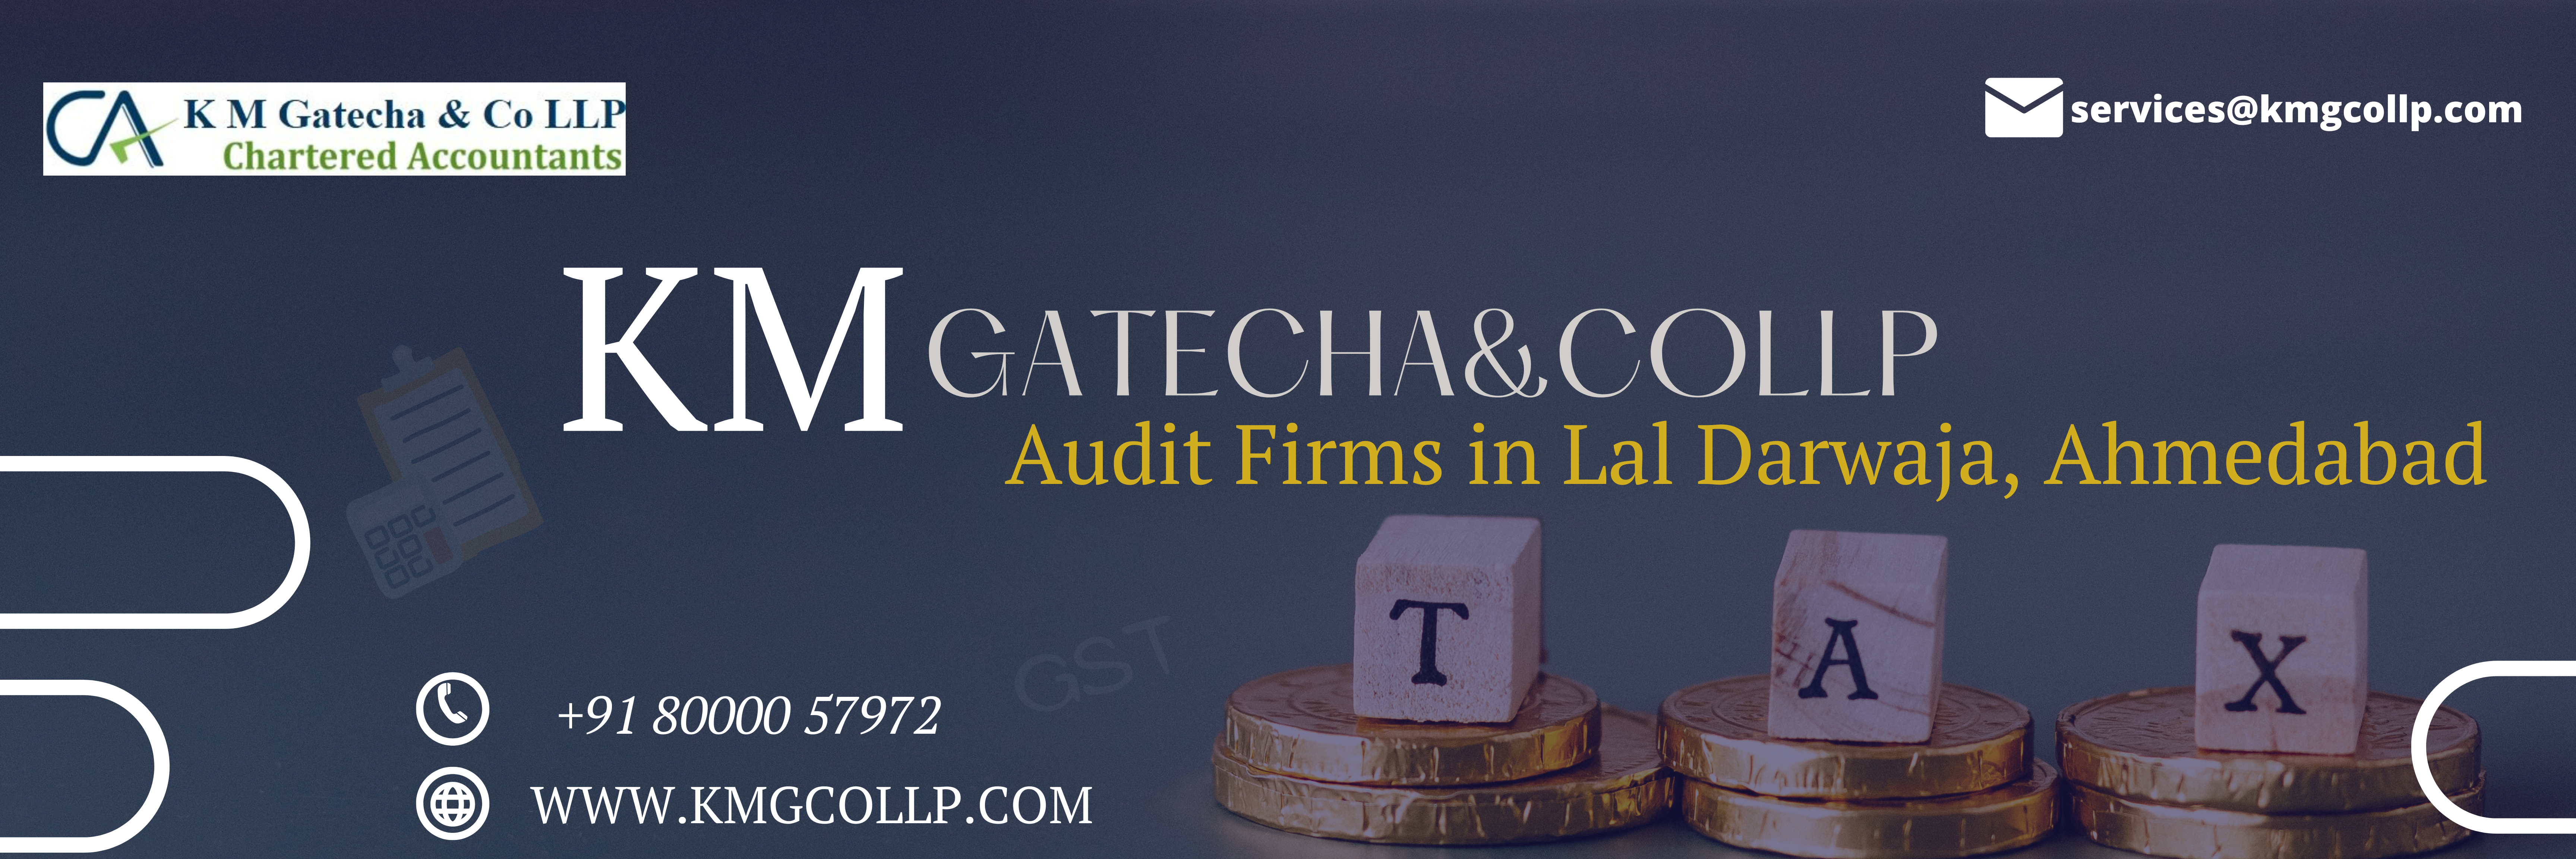 Audit Firms in Lal Darwaja